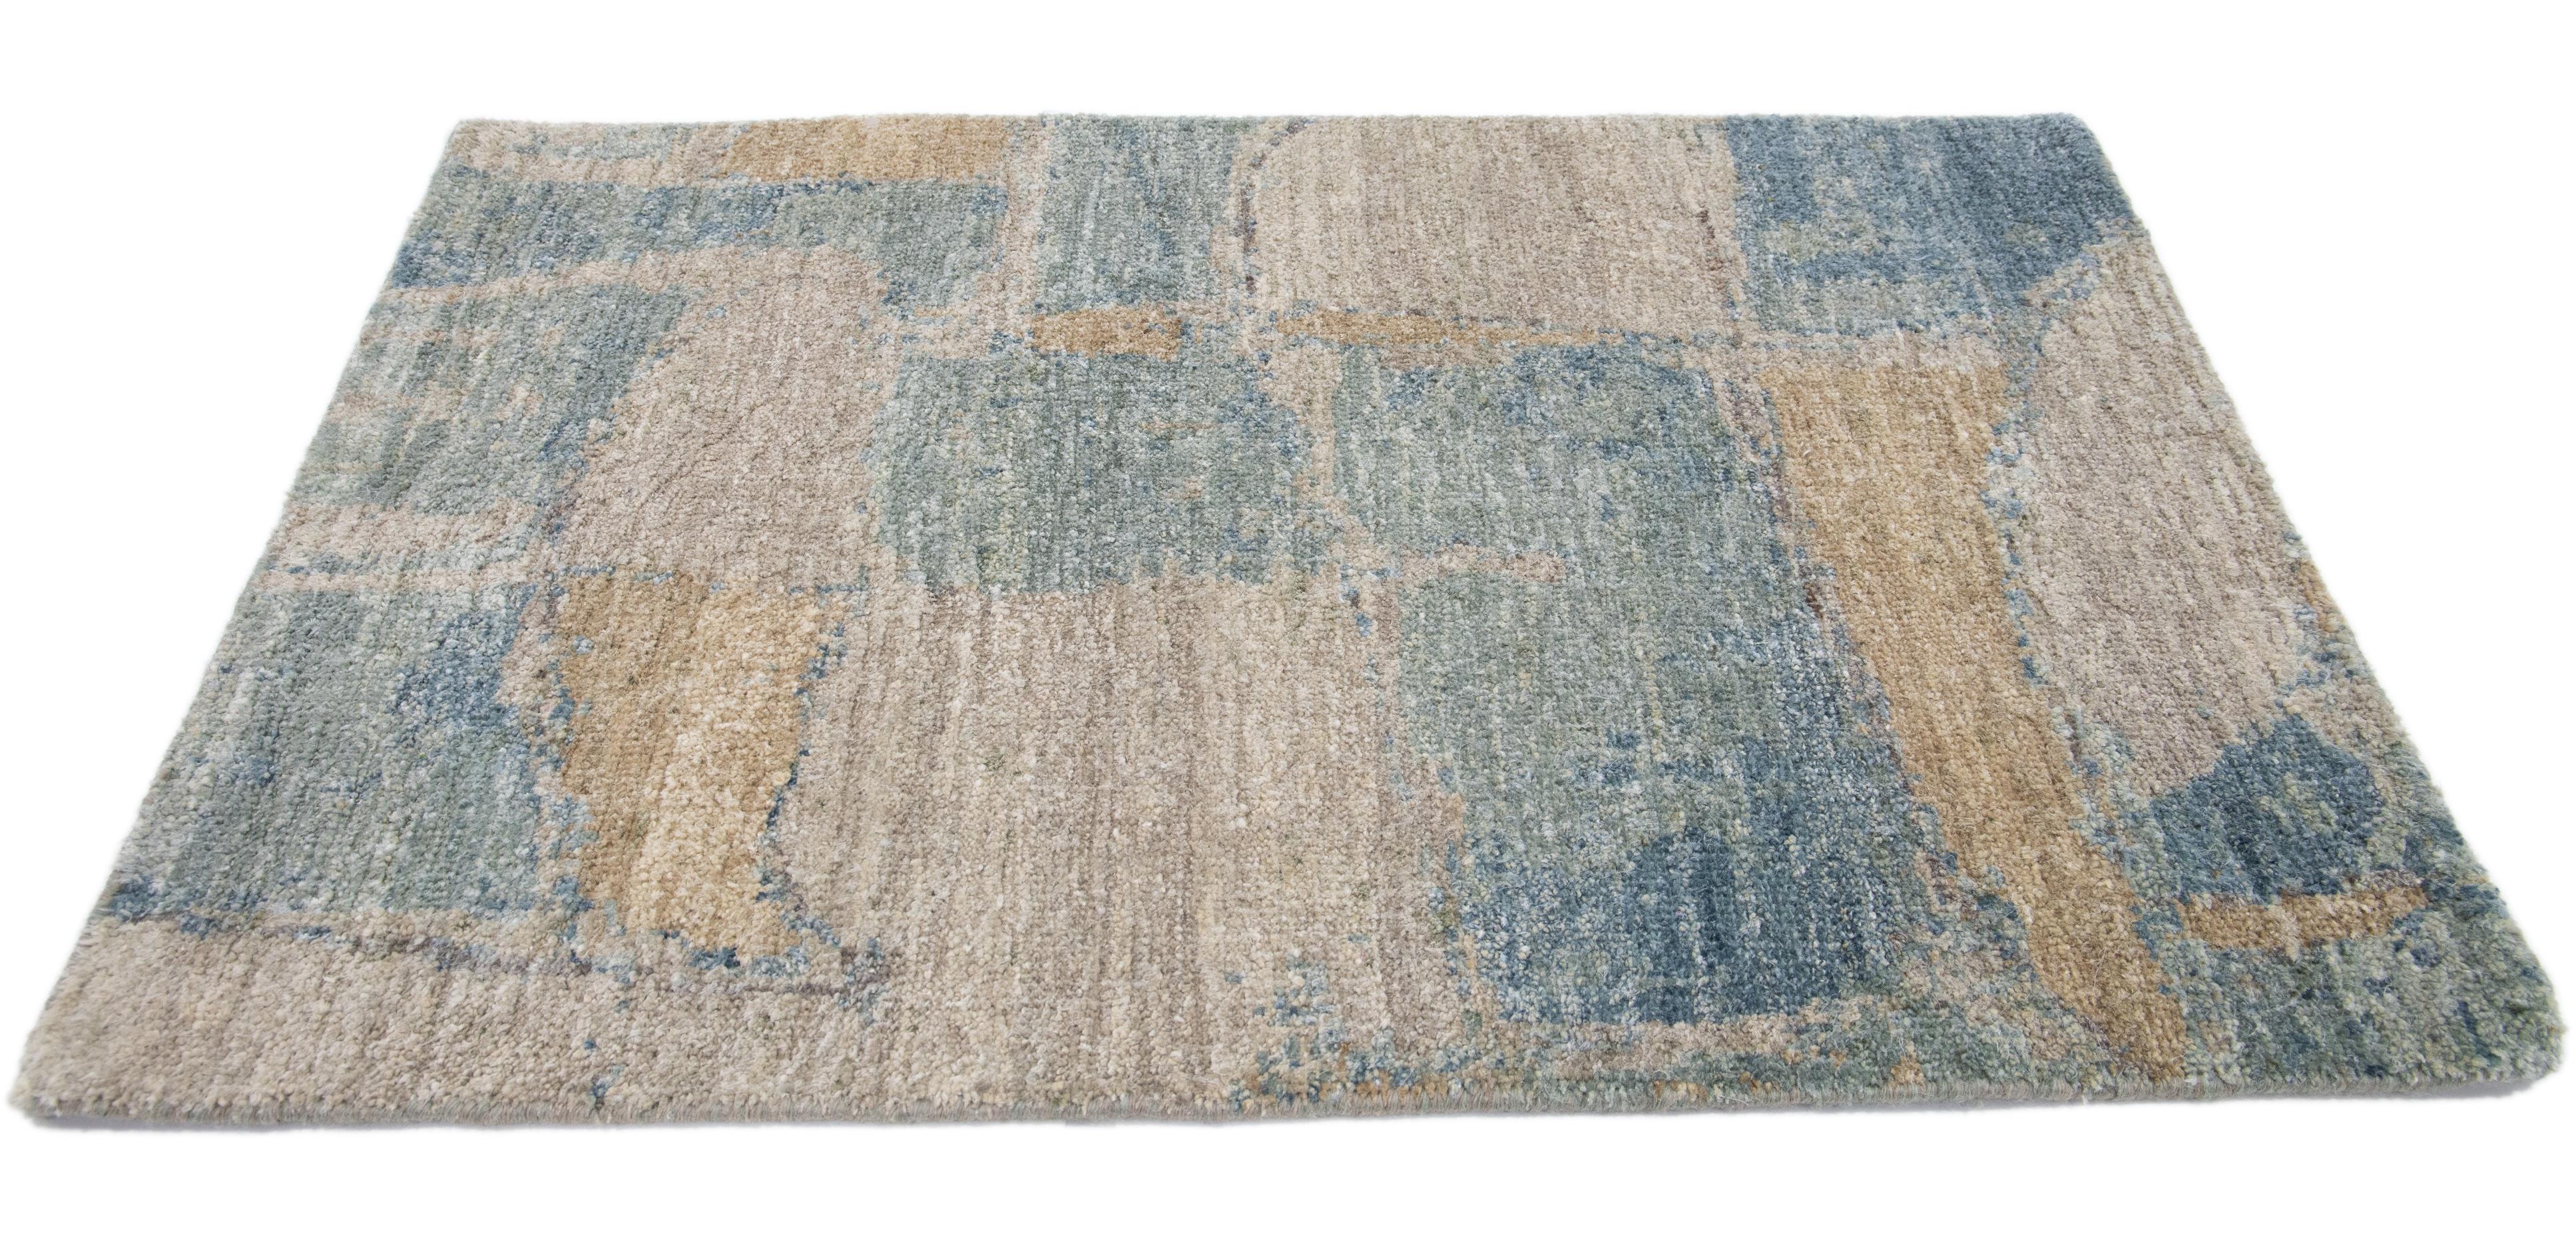 Apadana's Modern custom rug. Custom sizes and colors made-to-order. 

Material: Wool & Silk
Techniques: Hand-knotted
Style: Modern- Abstract
Lead time: Approx. 15-16 wks available 
Colors: As shown, other custom colors are available. 
Origen: India